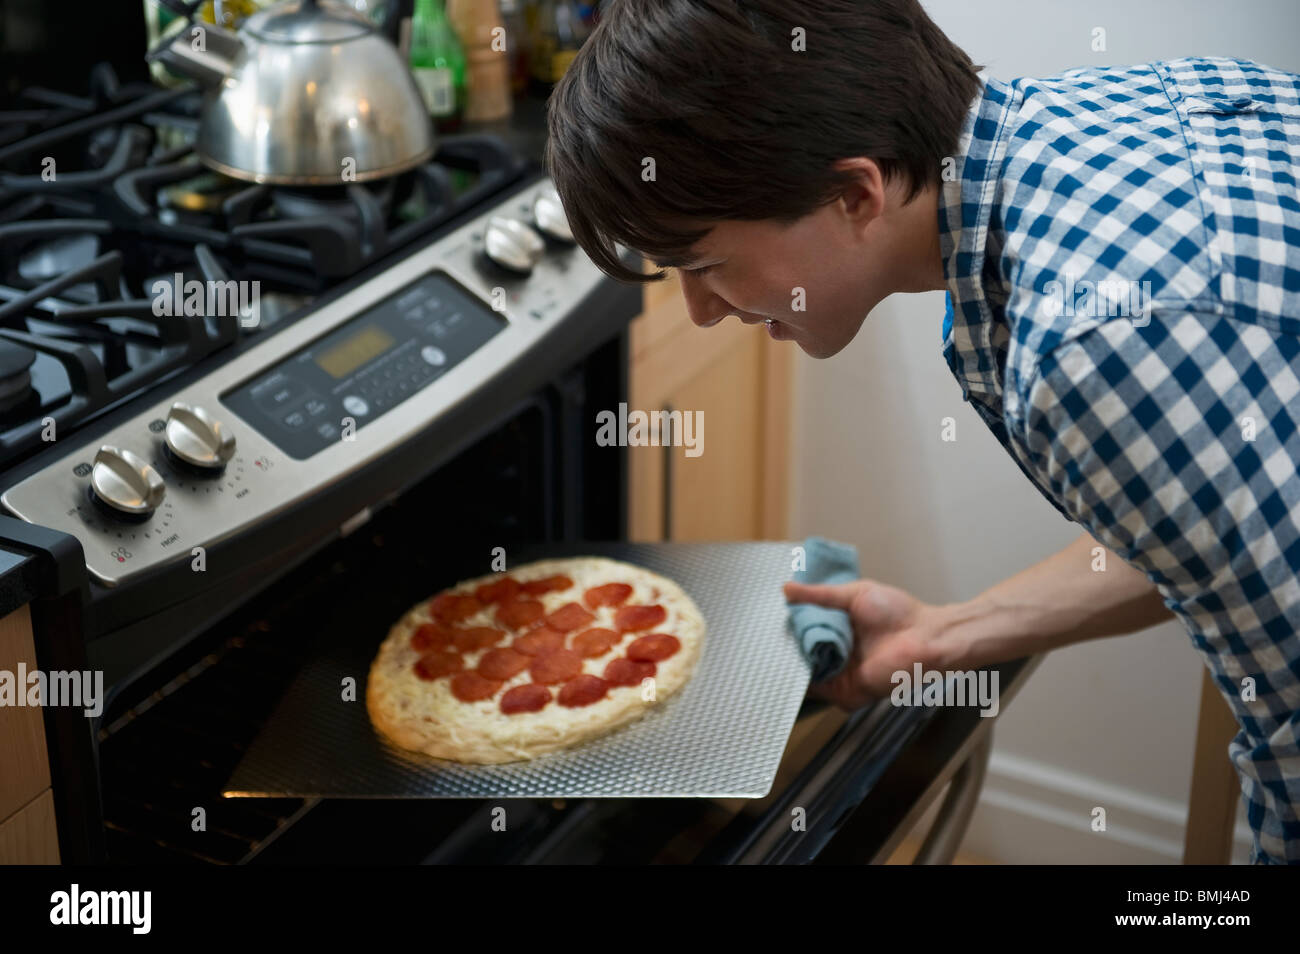 Man cooking pizza Stock Photo